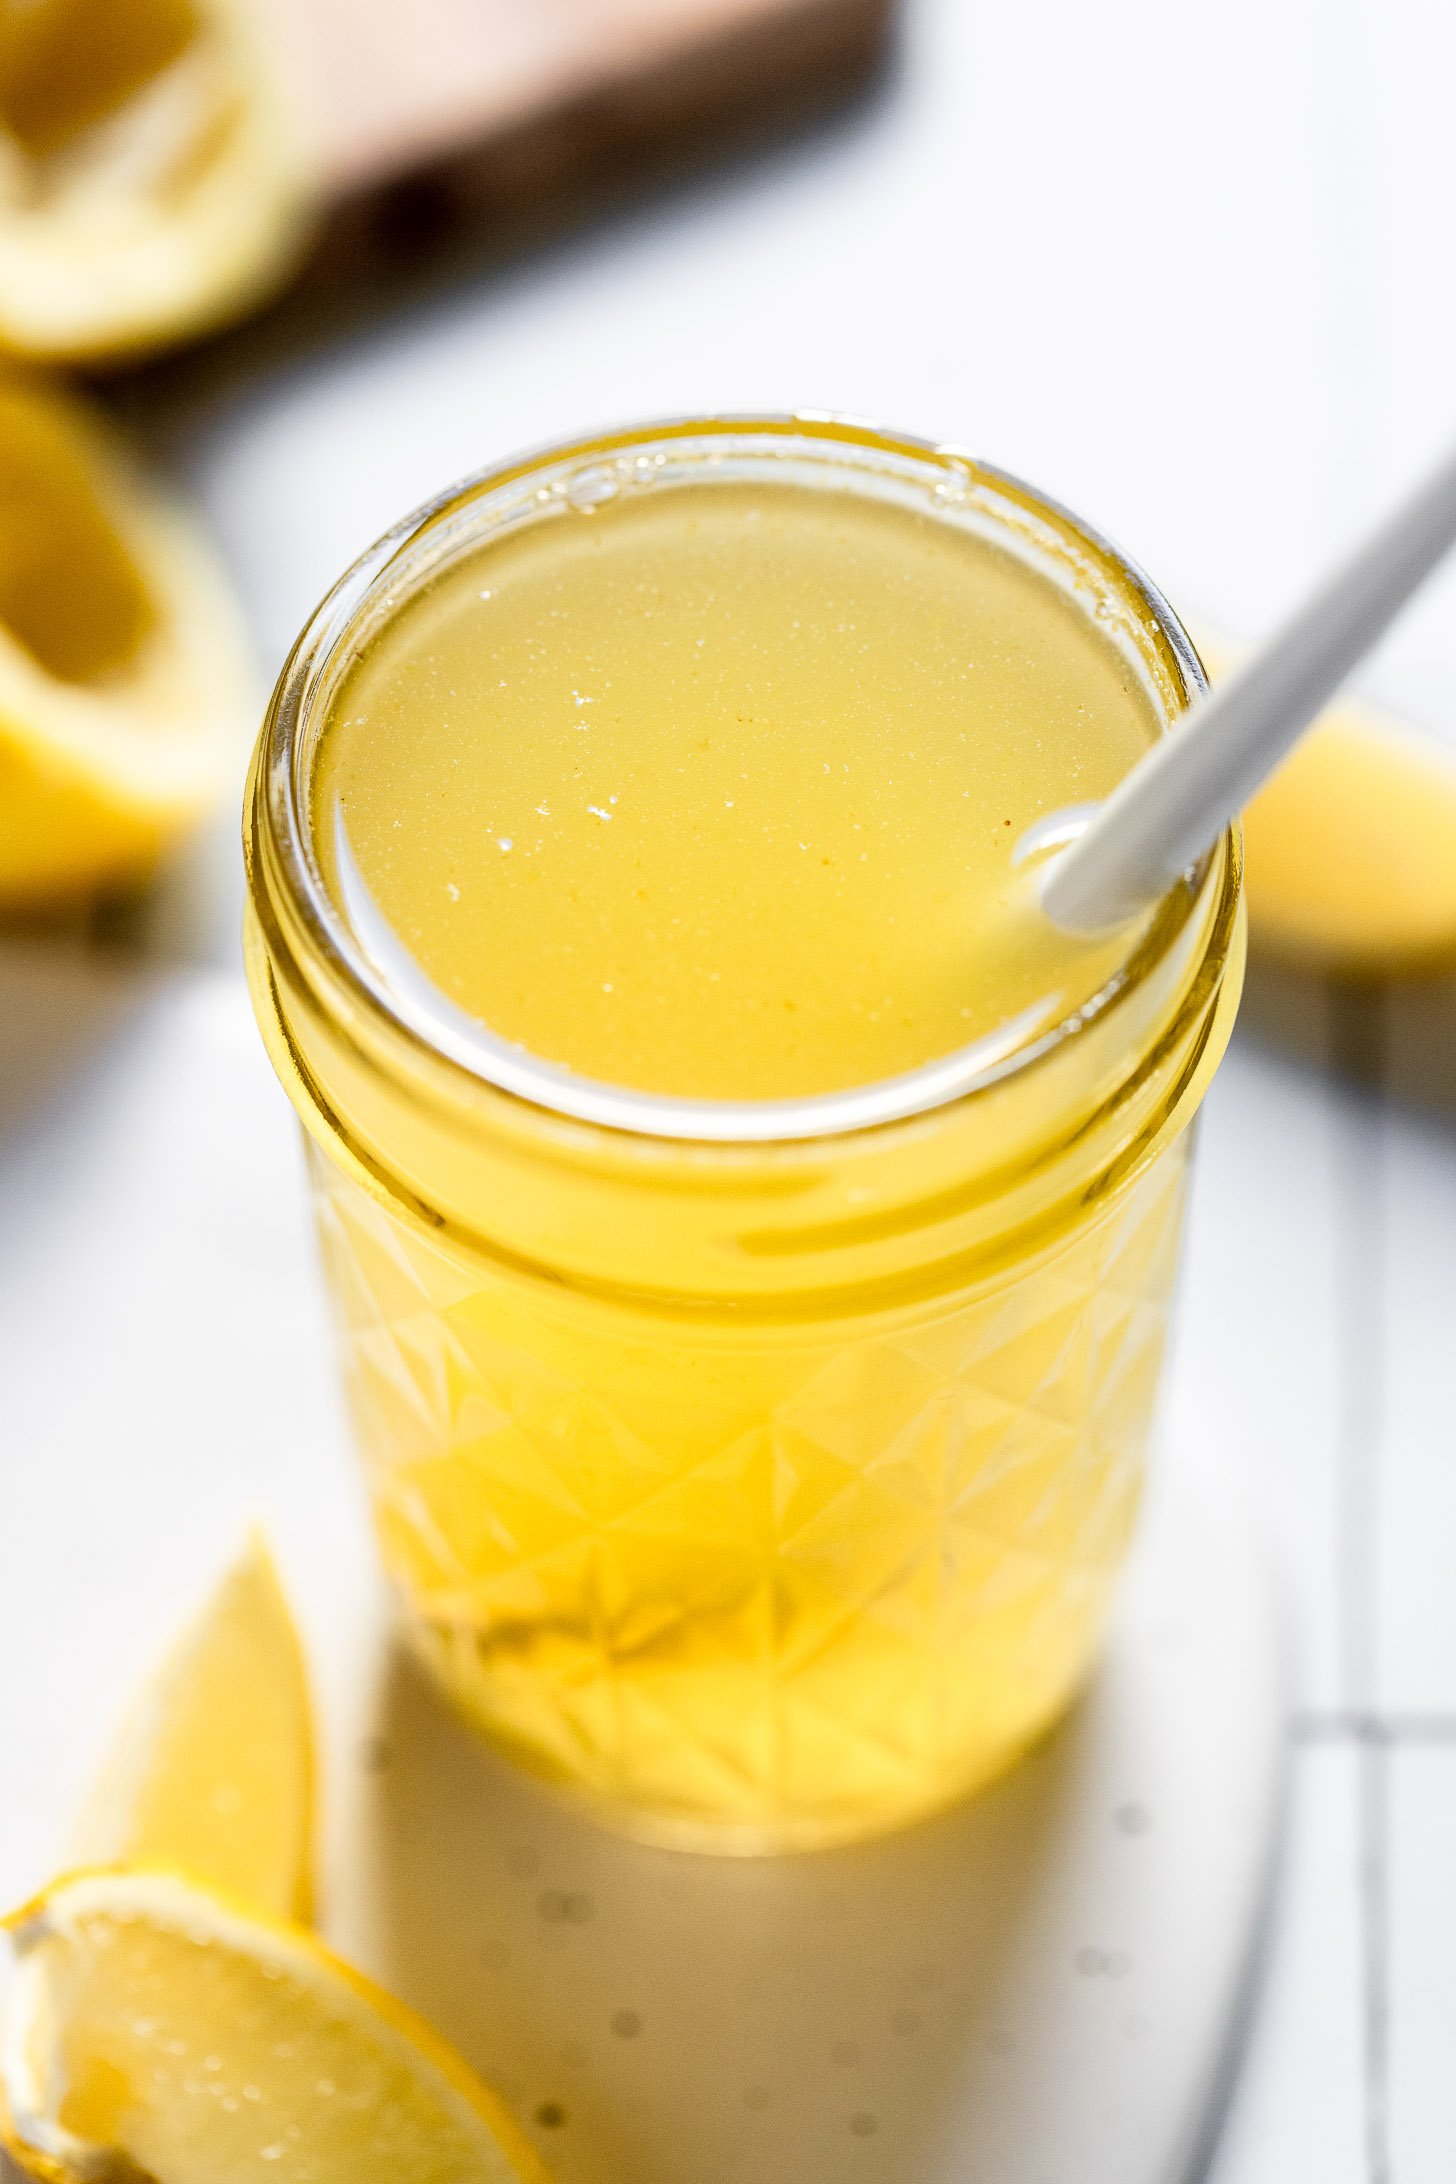 Jar of lemon syrup with spoon inside.